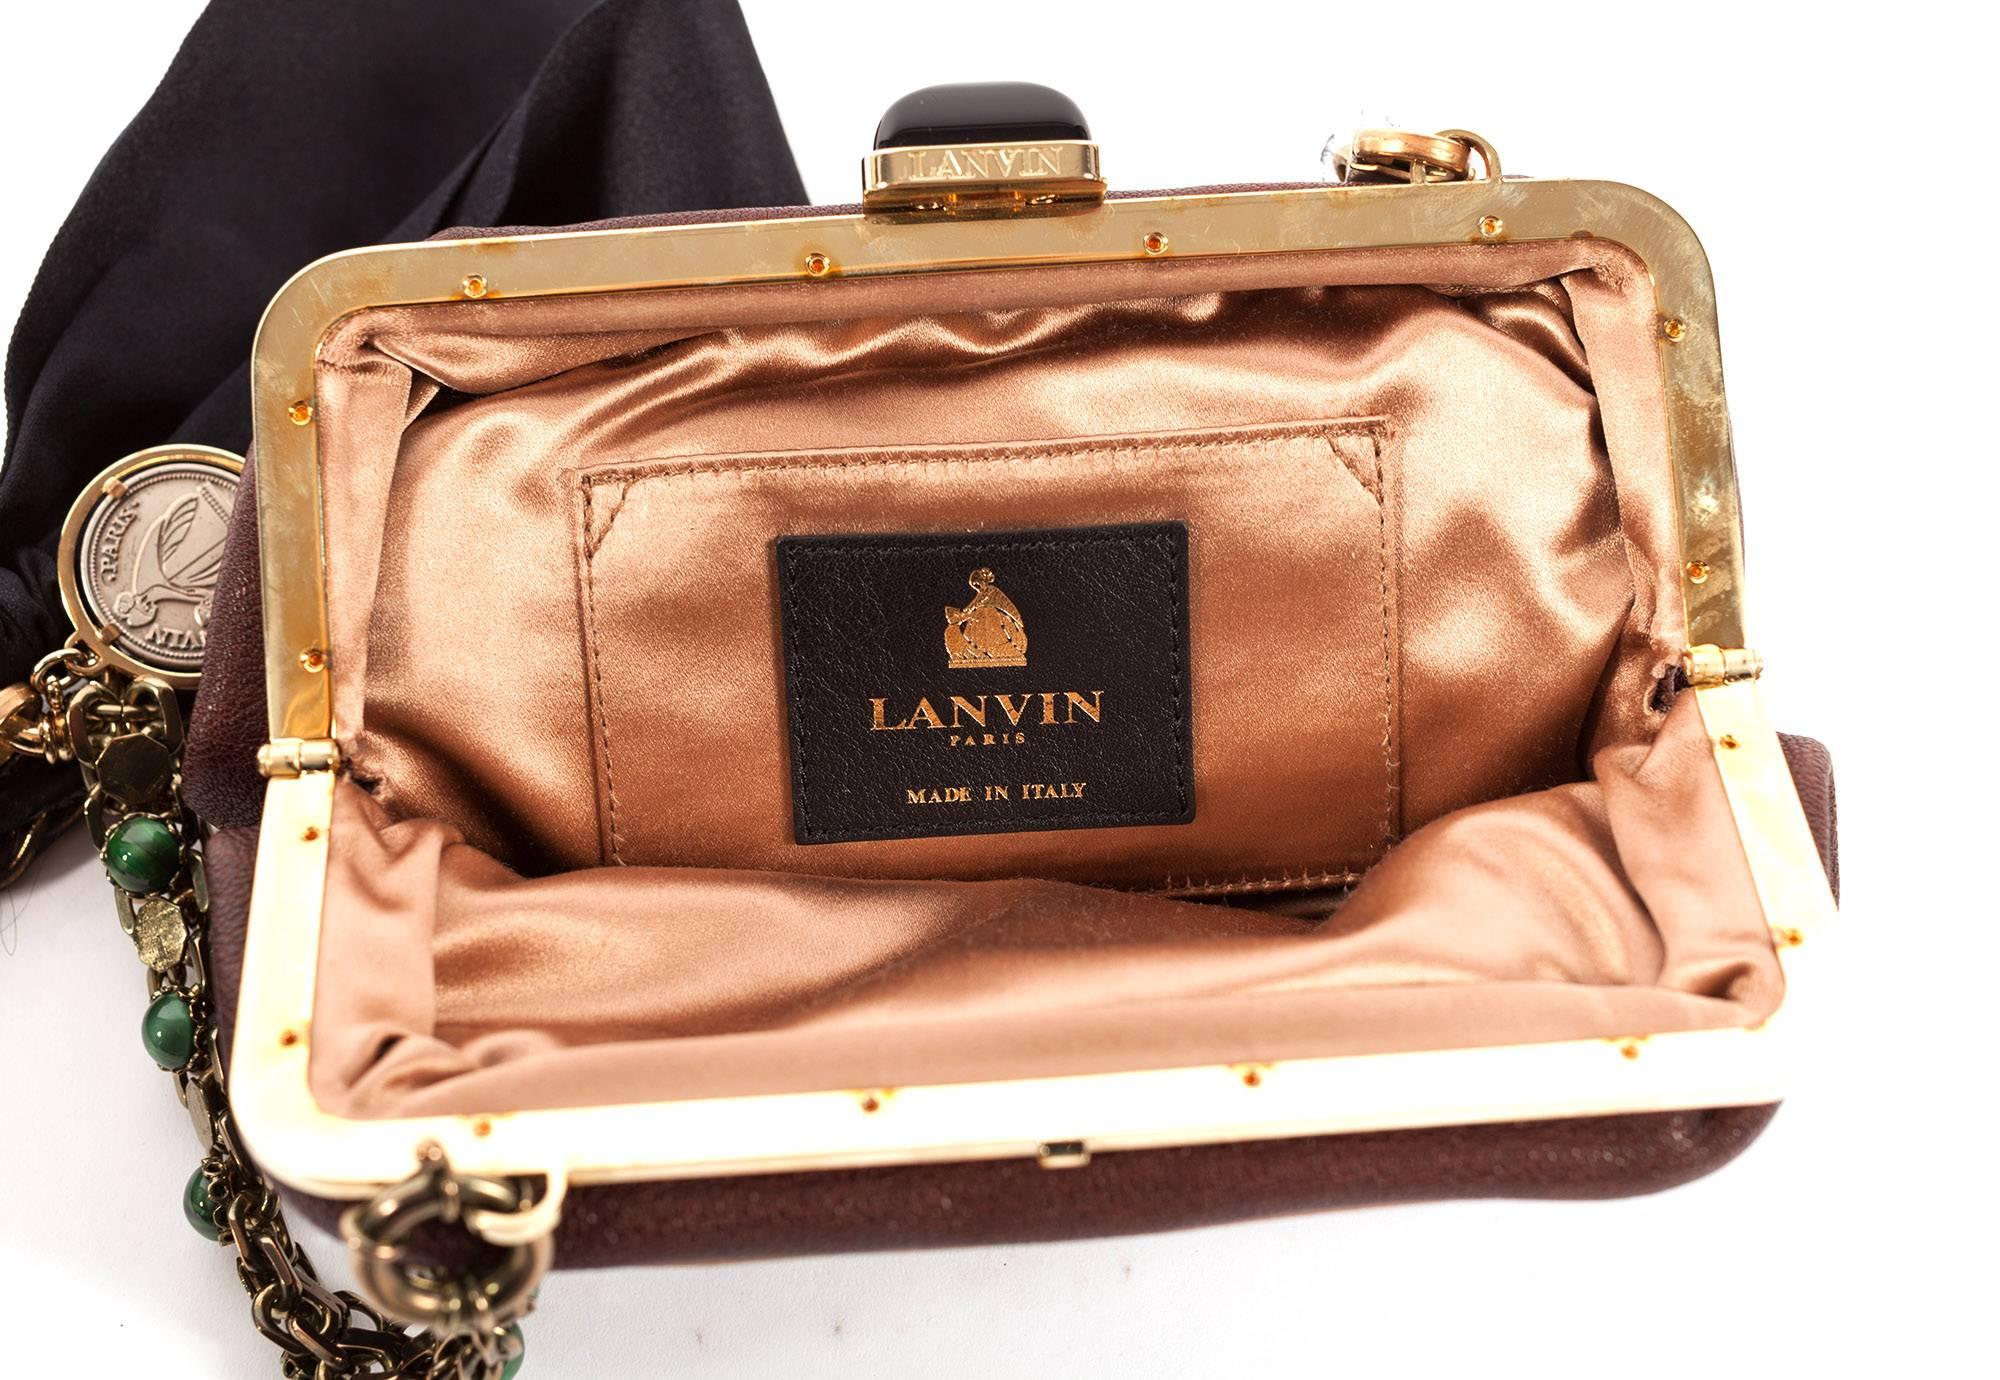 Lanvin by Alber Elbazs small Leather Purse with gold chain and large bow 2